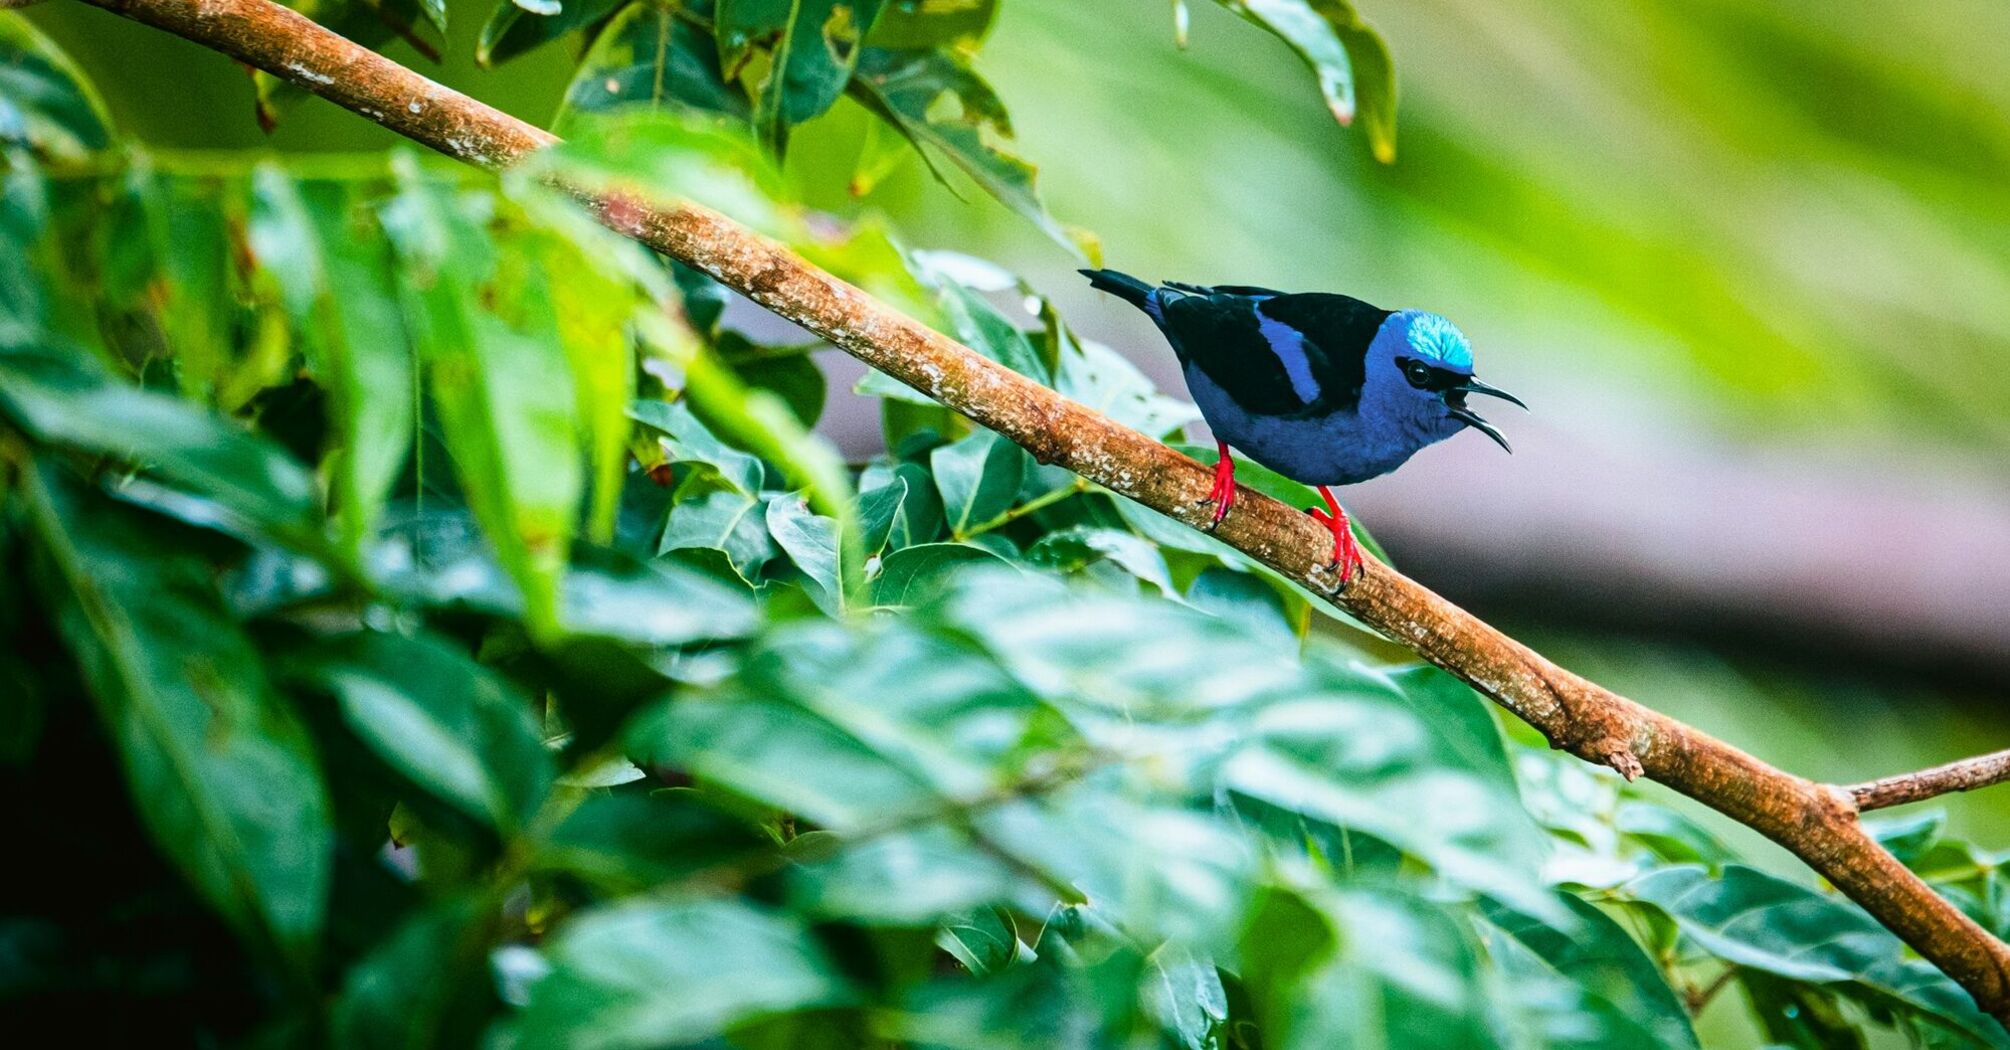 Blue bird perched on a branch